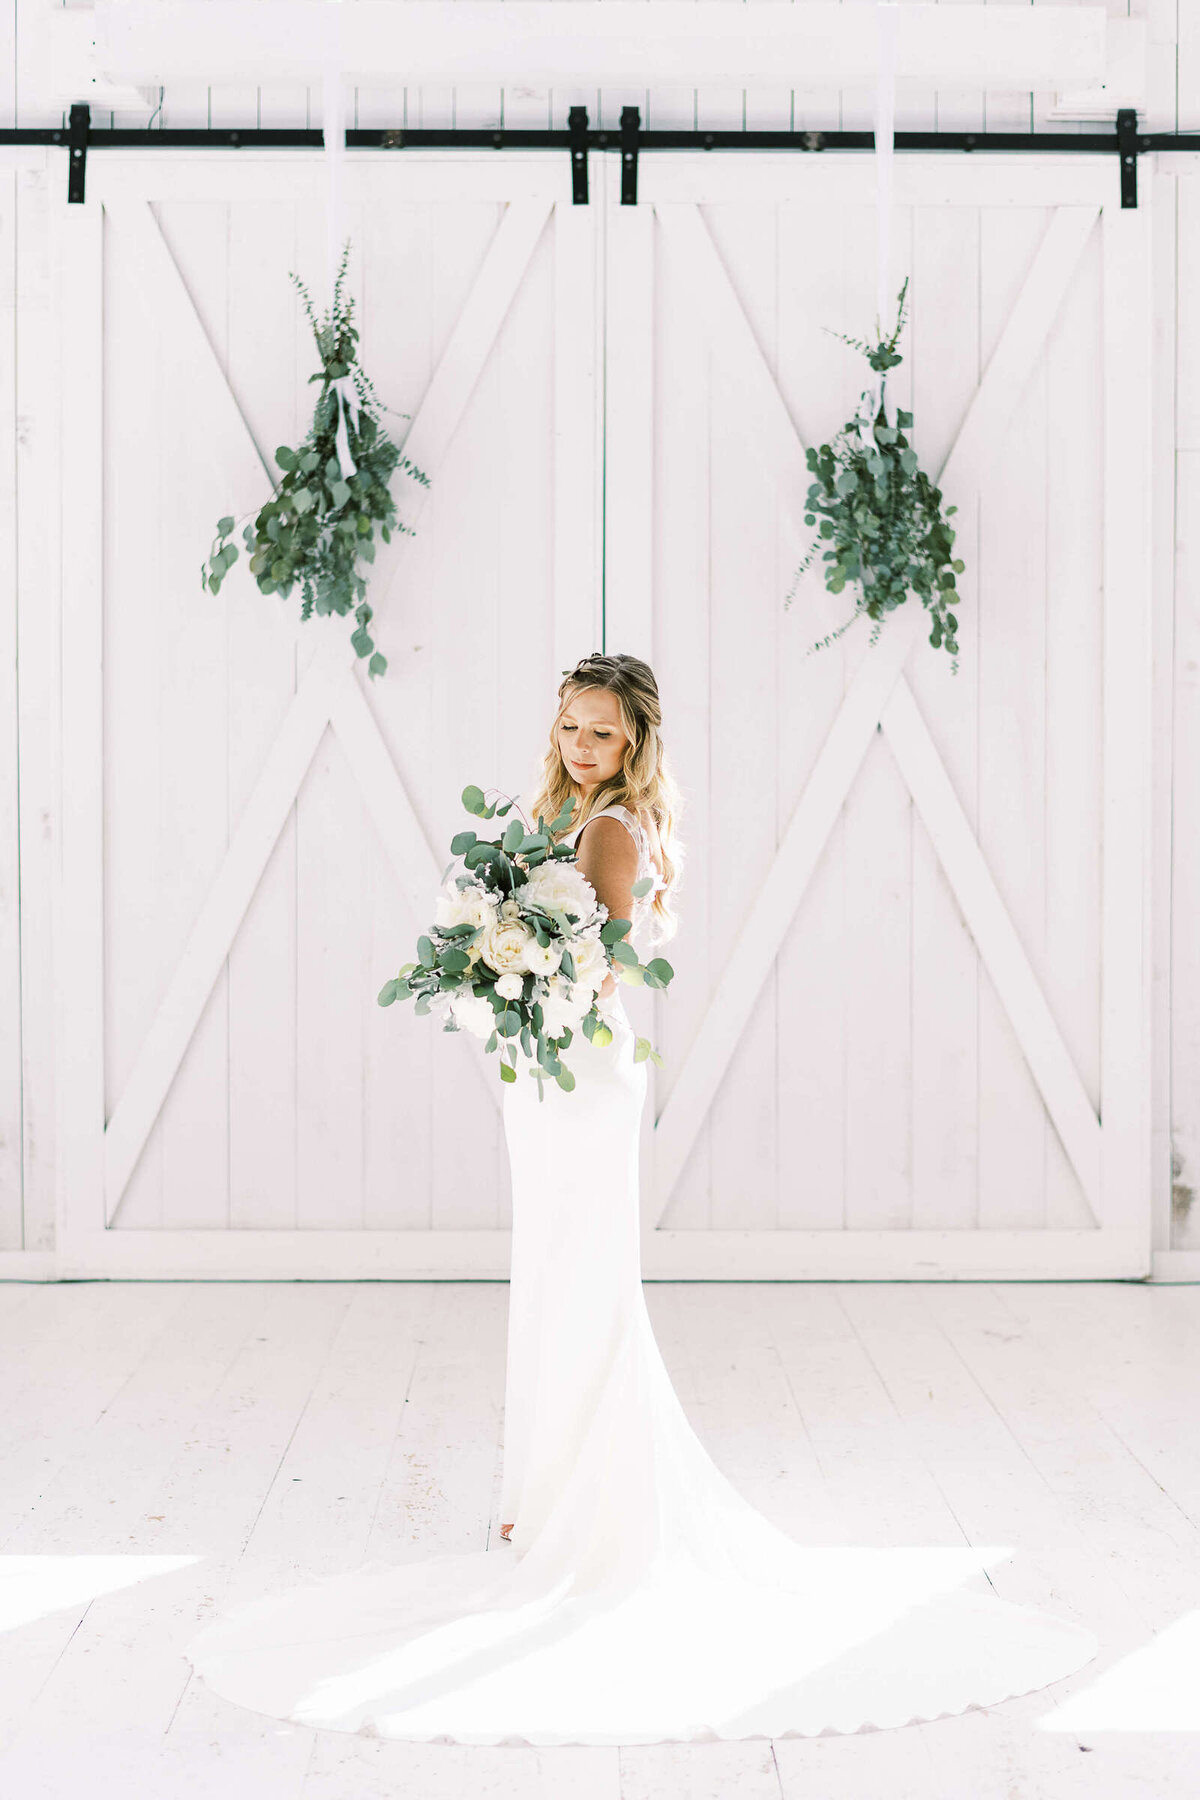 Classy simple bridals with greenery and white barn doors in North Texas